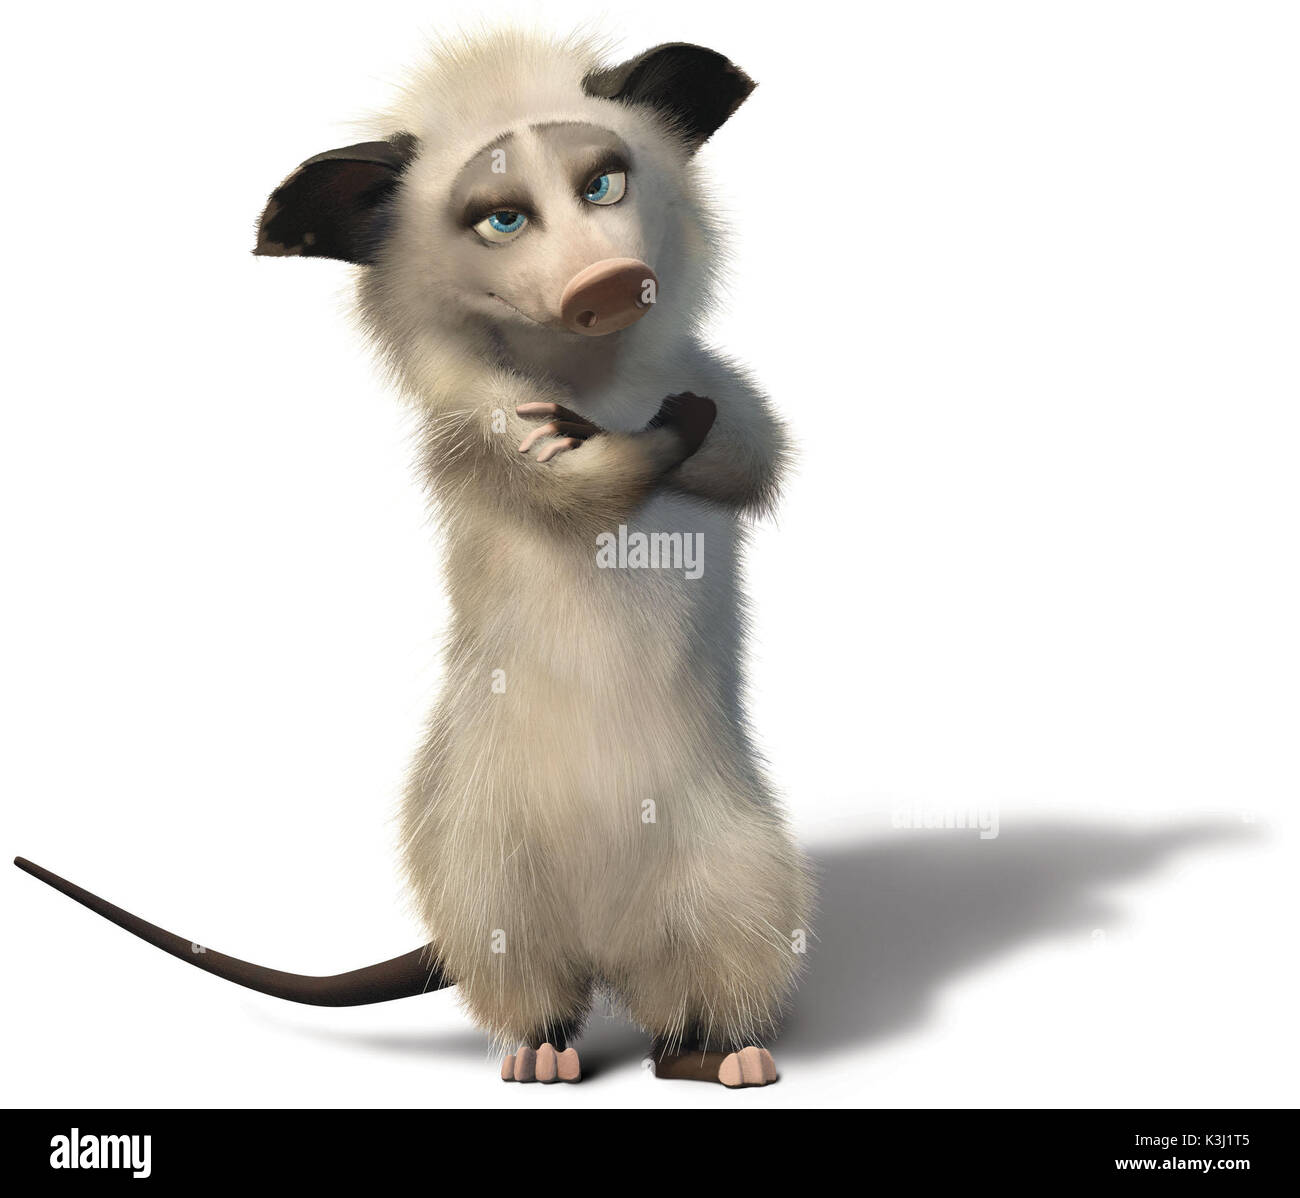 Pictured: Heather the Possum from DreamWorks Animation's computer-animated comedy OVER THE HEDGE. OVER THE HEDGE [US 2006]  Heather the Possum     Date: 2006 Stock Photo